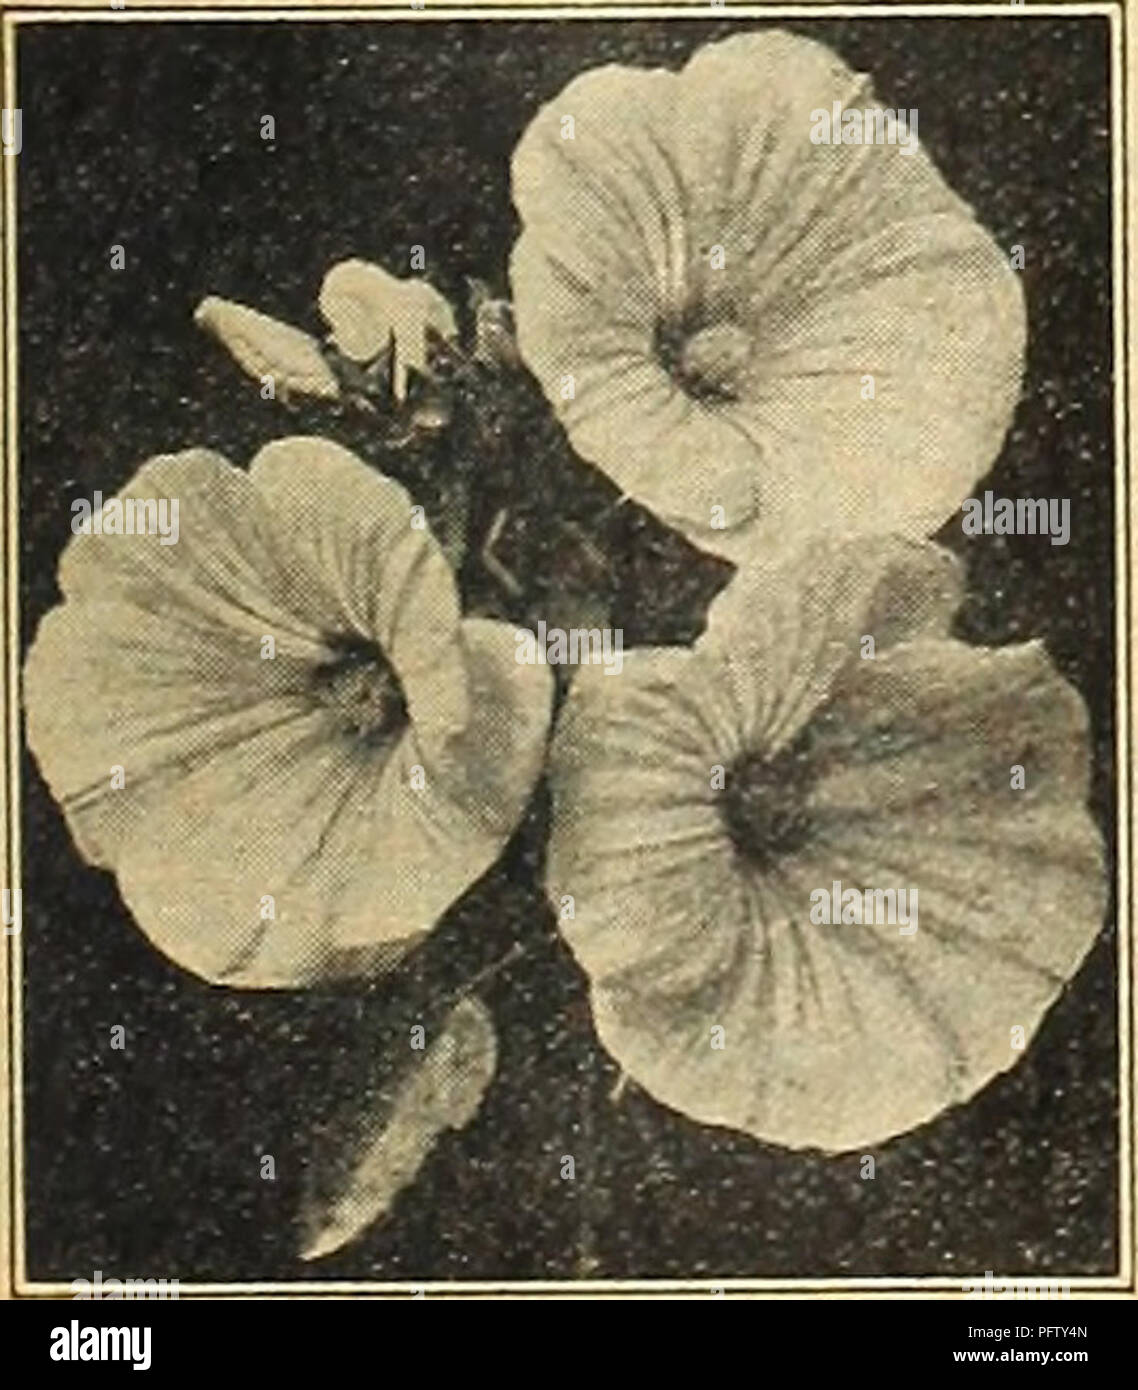 . Currie's farm and garden annual : spring 1921 46th year. Flowers Seeds Catalogs; Bulbs (Plants) Seeds Catalogs; Vegetables Seeds Catalogs; Nurseries (Horticulture) Catalogs; Plants, Ornamental Catalogs; Gardening Equipment and supplies Catalogs. Maurandia.. 5 10 Lavatera Splendens. MIGNONETTE—Continued. Pkt Machet—A variety of dwarf, vigorous growth, with dark green foliage and deliciously fragrant red flowers; very fine and distinct. Per oz. $1.00; V± oz. 30c Machet Extra Select—Seed saved from pot grown plants. Very fine for growing under glass. Oz. $1.40; % oz. 40c Miles Hybrid Spiral—Is  Stock Photo